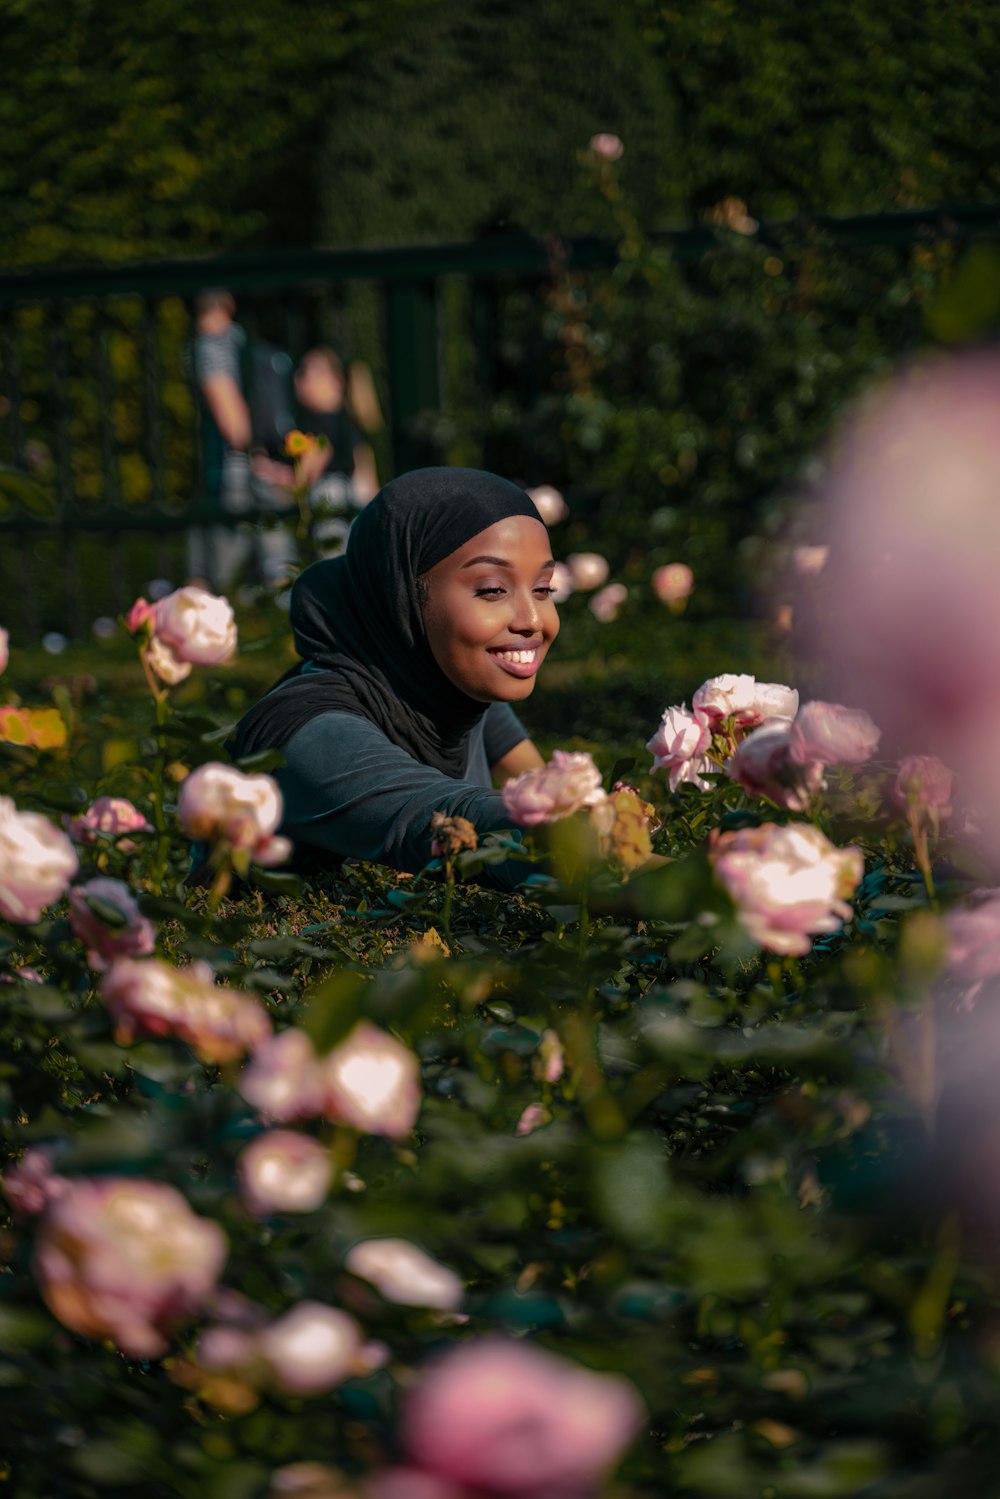 woman in black hijab holding white flowers